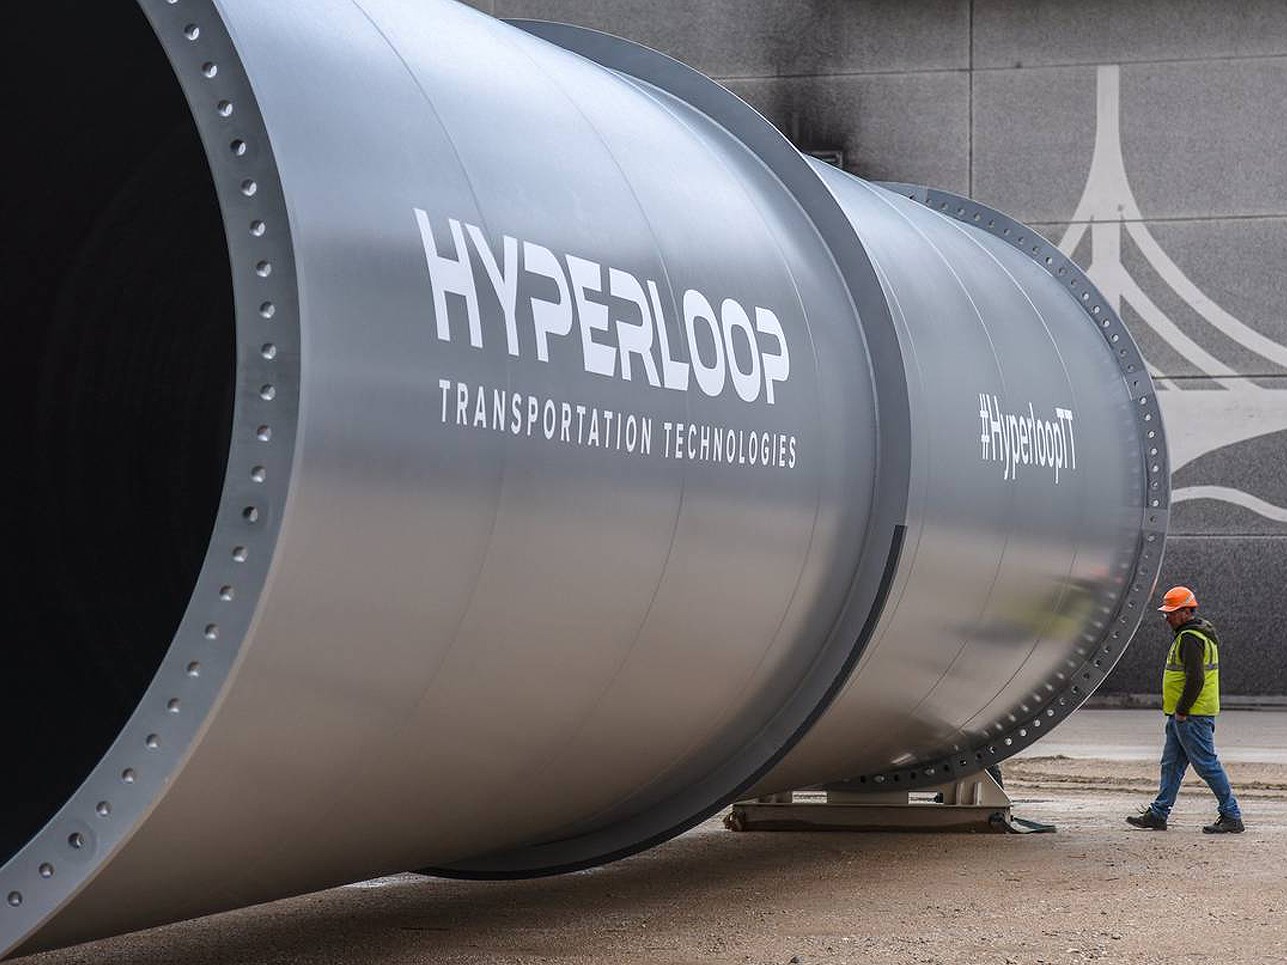 Design Lead on the Transportation Project of the Millennium: Dar Al-Handasah to Bring the Hyperloop to the Middle East.